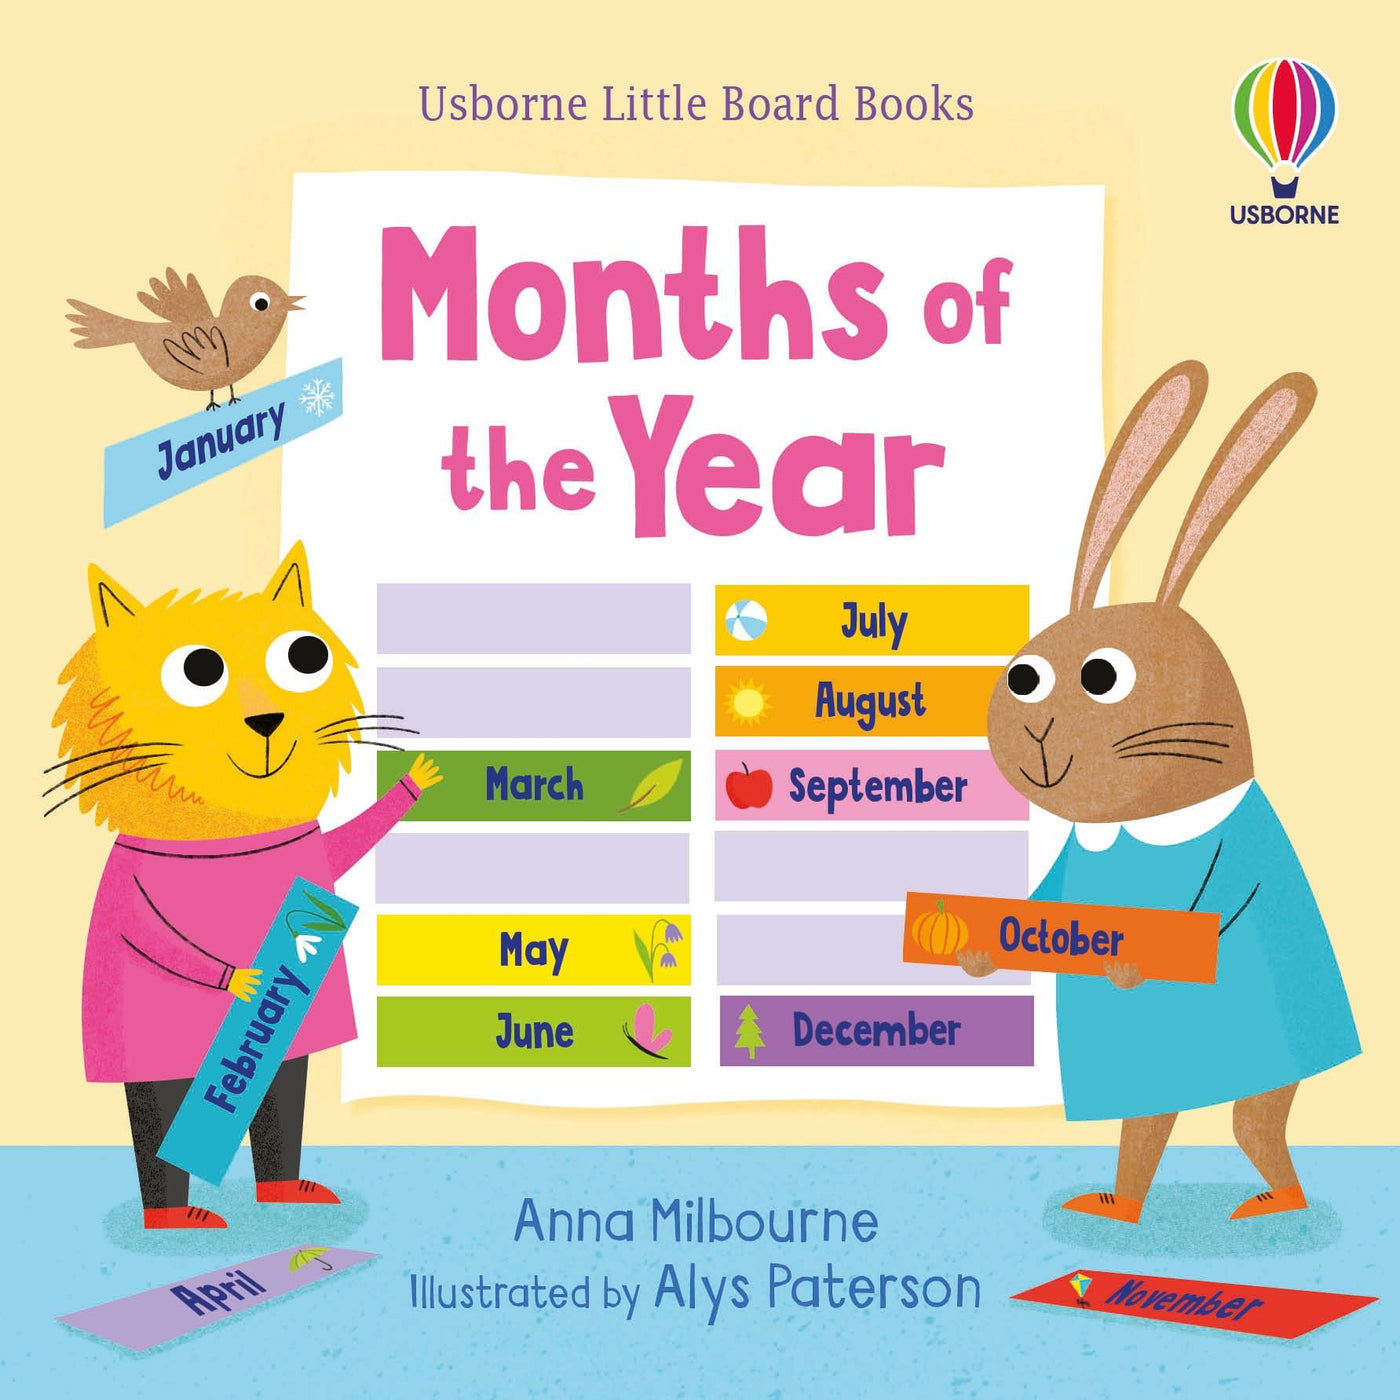 Months of the Year: Little Board Books | Usborne